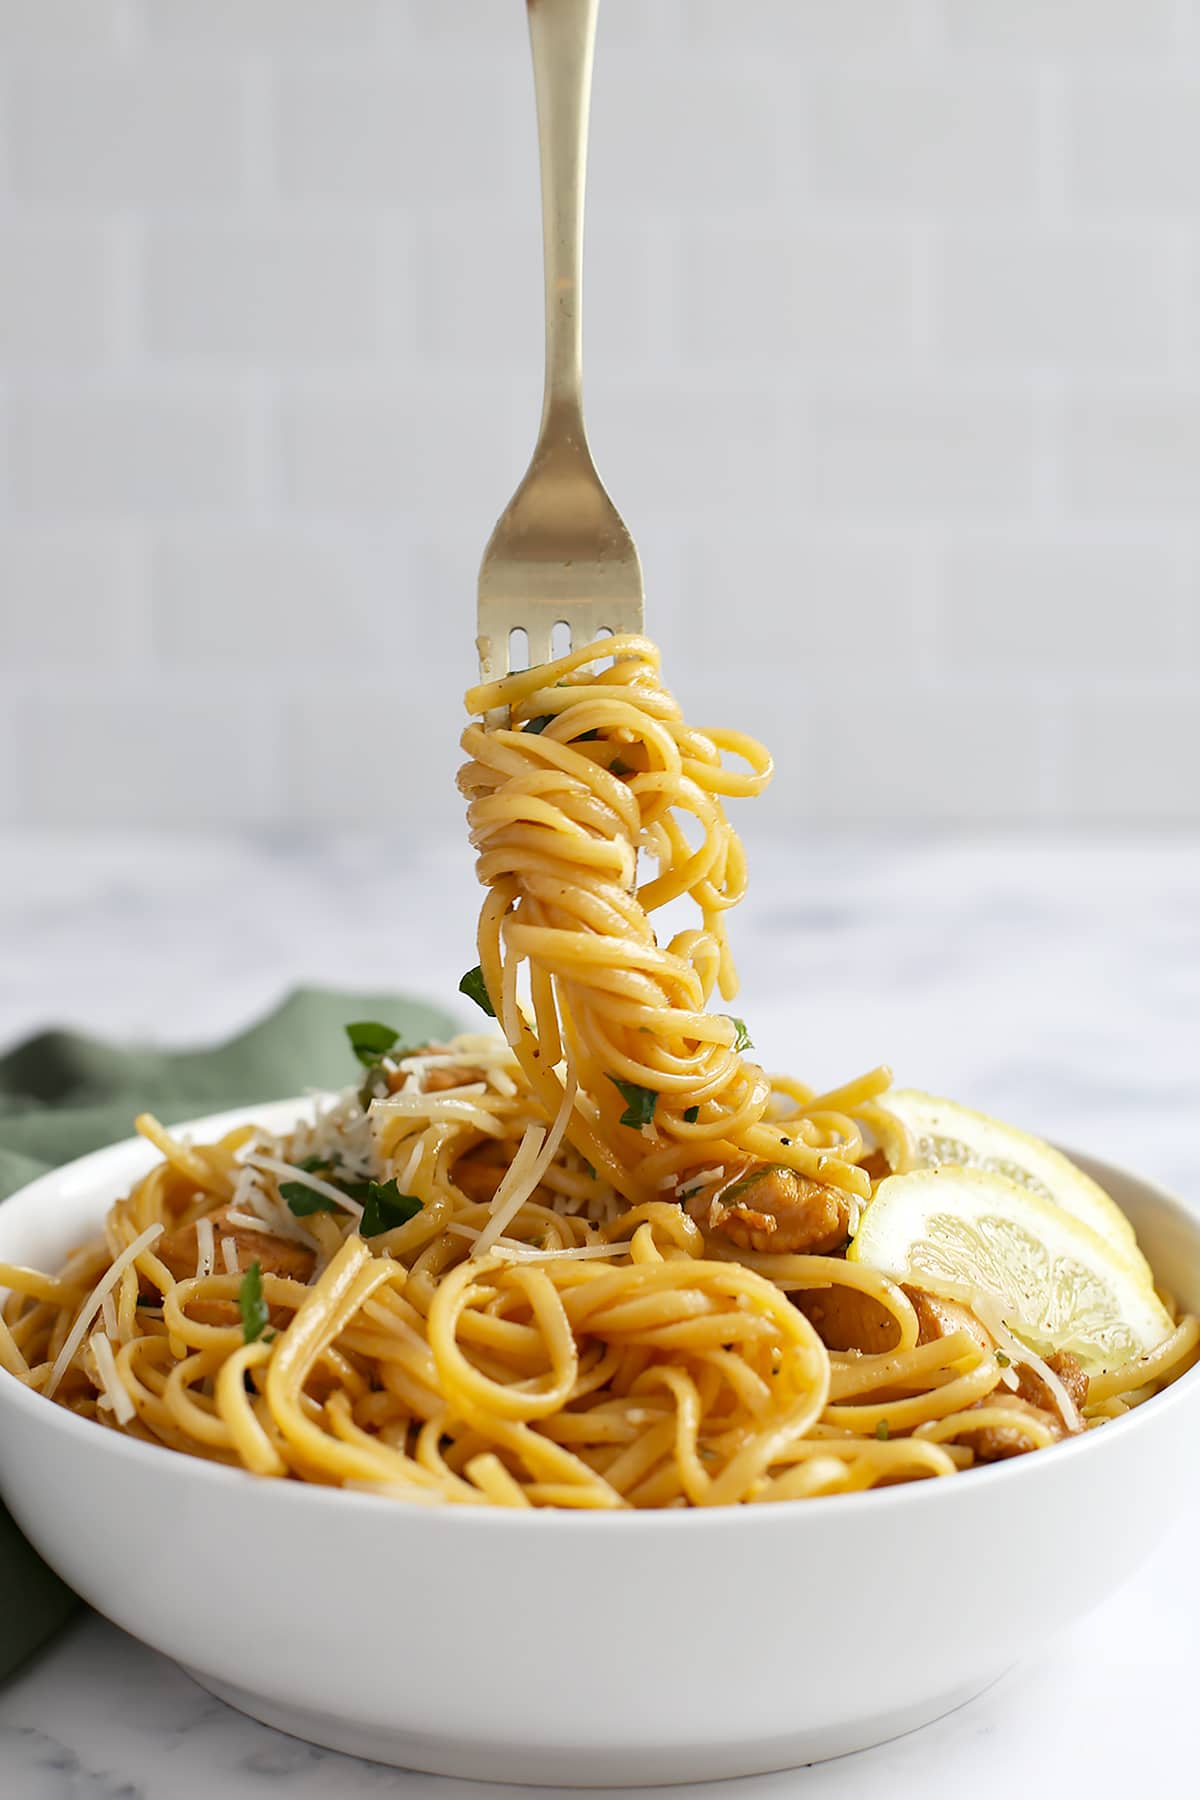 Lemon chicken pasta in a large serving bowl, twisted around a gold fork.